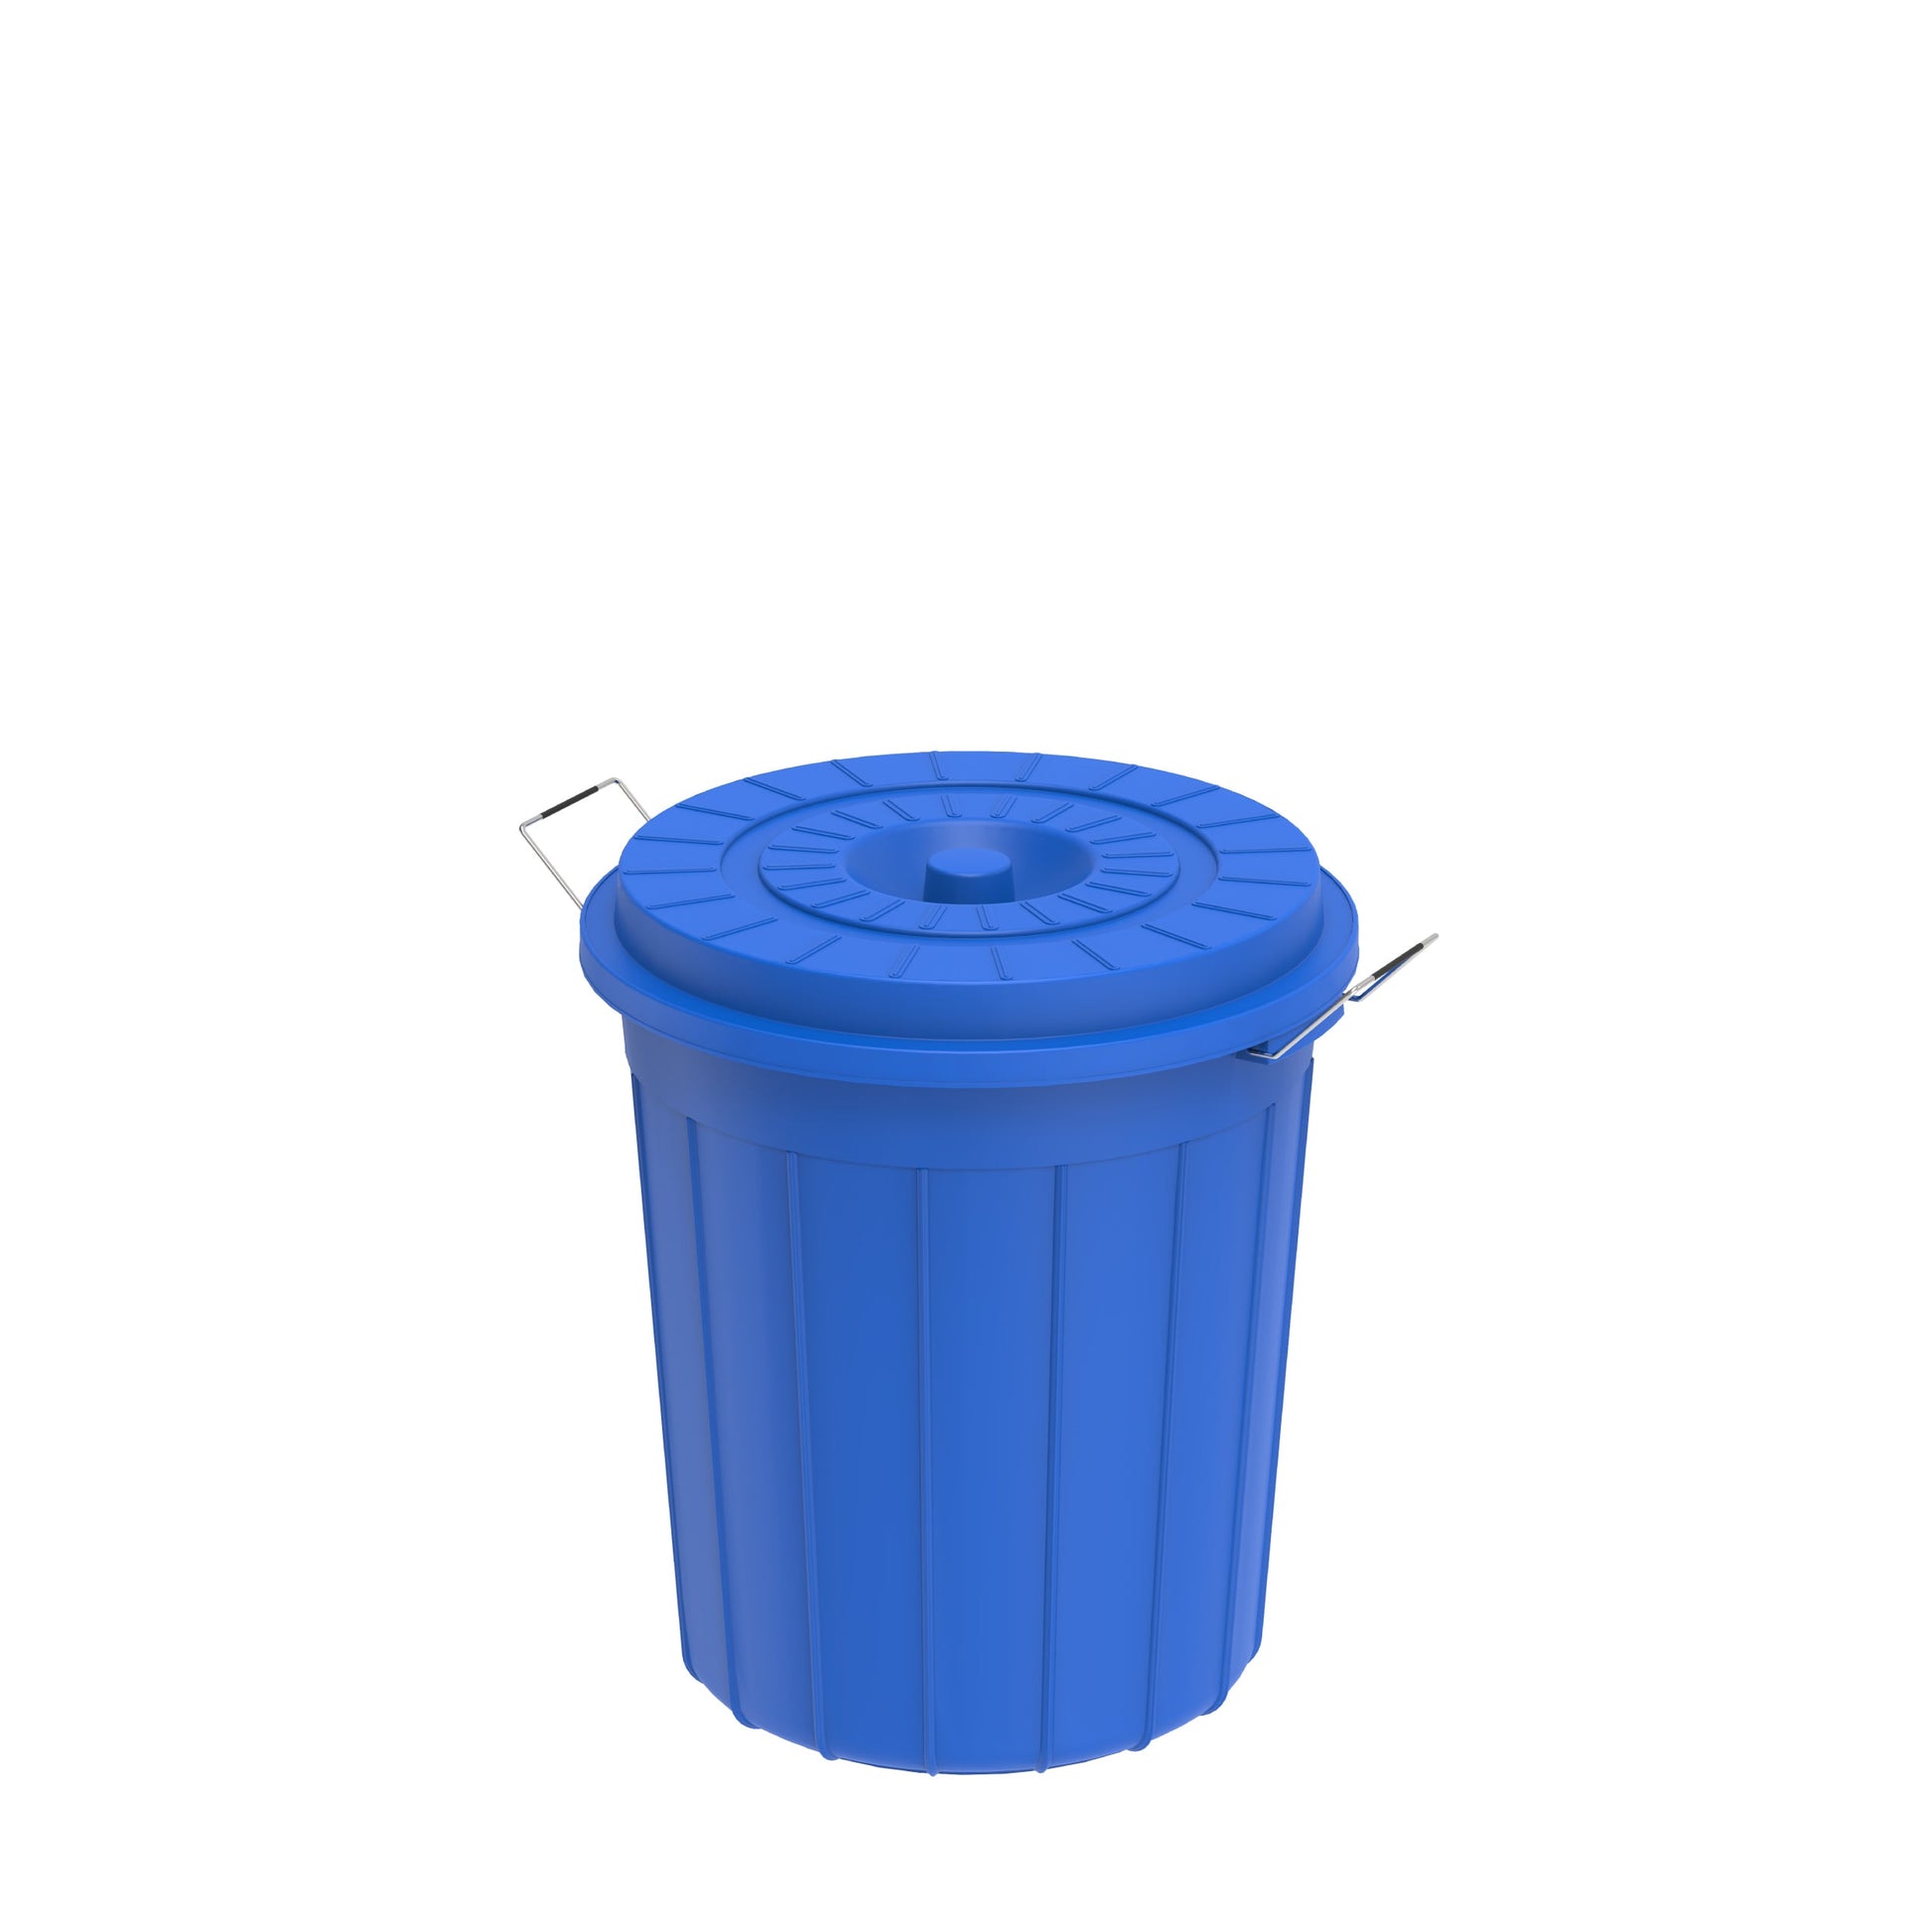 35L Round Plastic Drums with Lid - Cosmoplast Bahrain